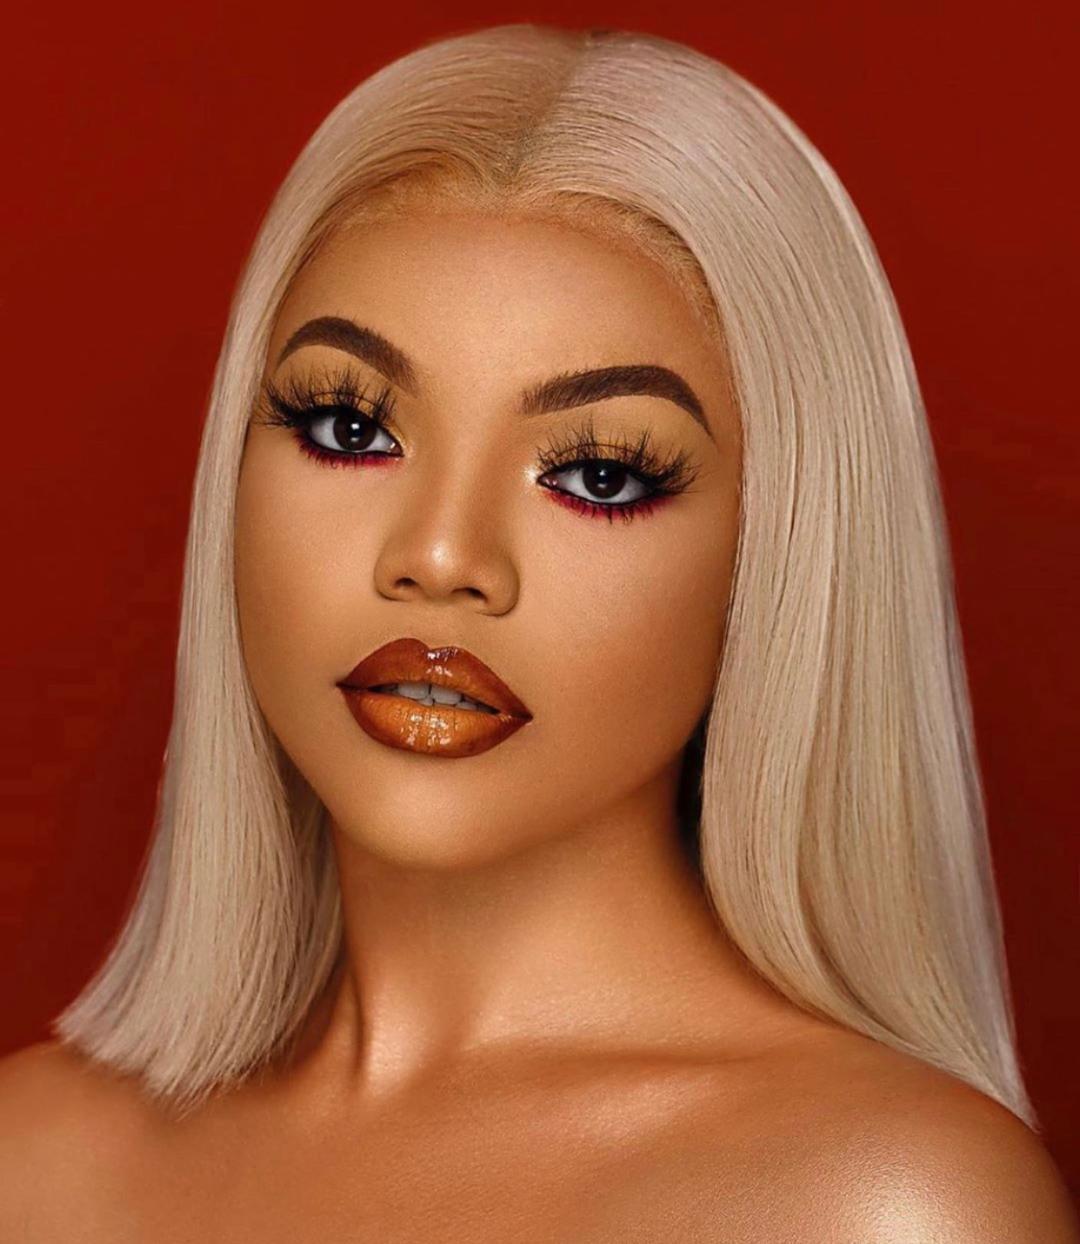 5 most beautiful Nigerian teenagers on Instagram - Iyabo Ojo and Mercy Aigbe's daughter top list (Photos)